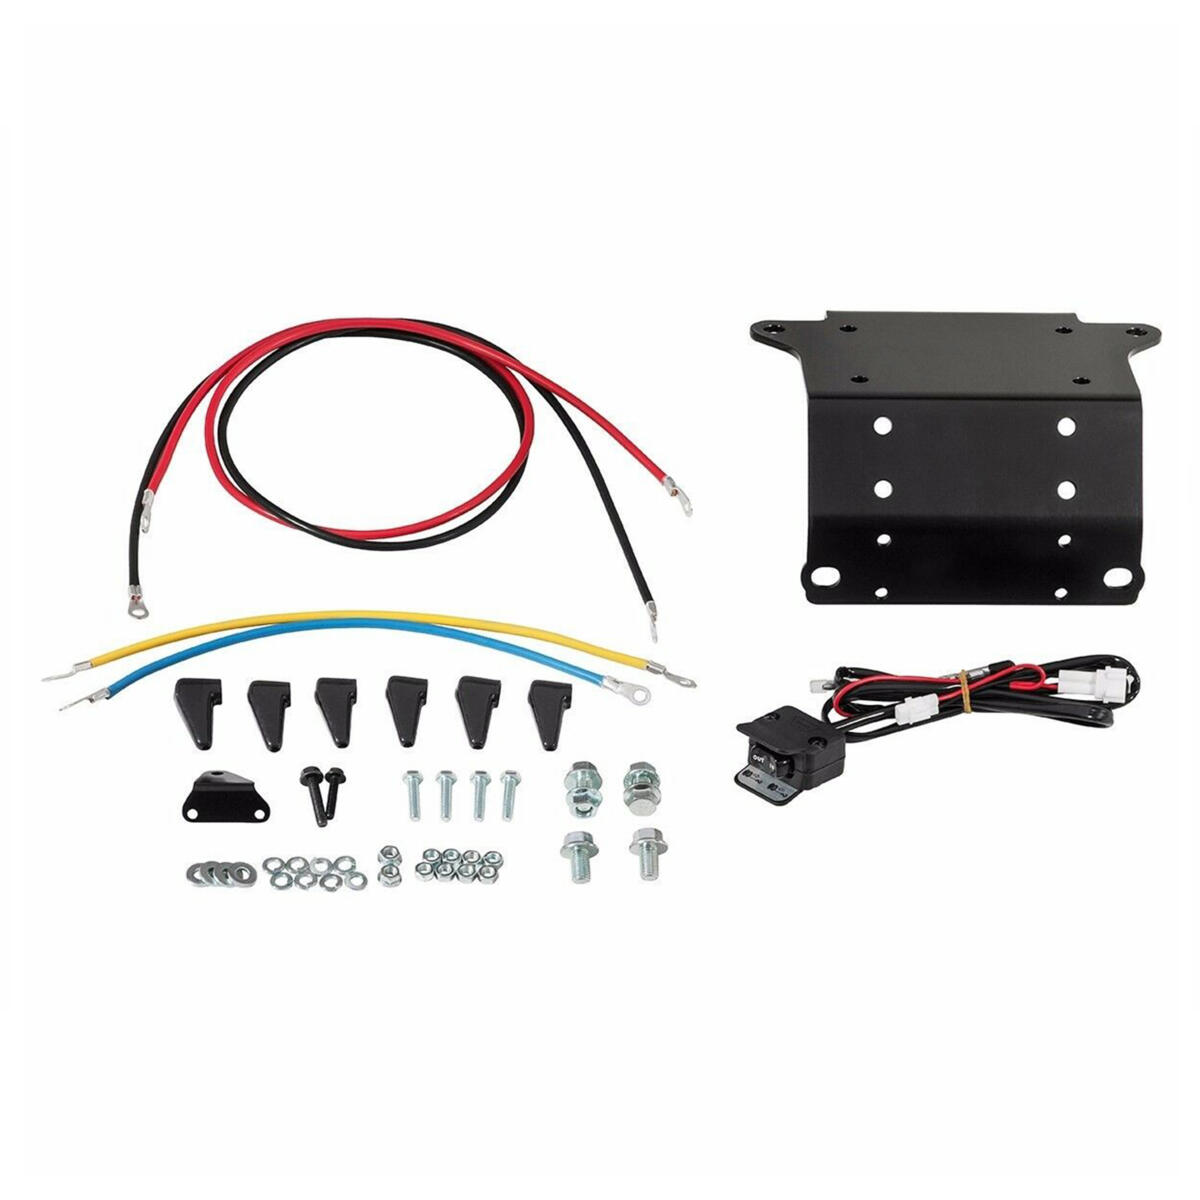 Mount for a perfect fit of your optional WARN® Vantage 2000 or ProVantage 2500 winch.